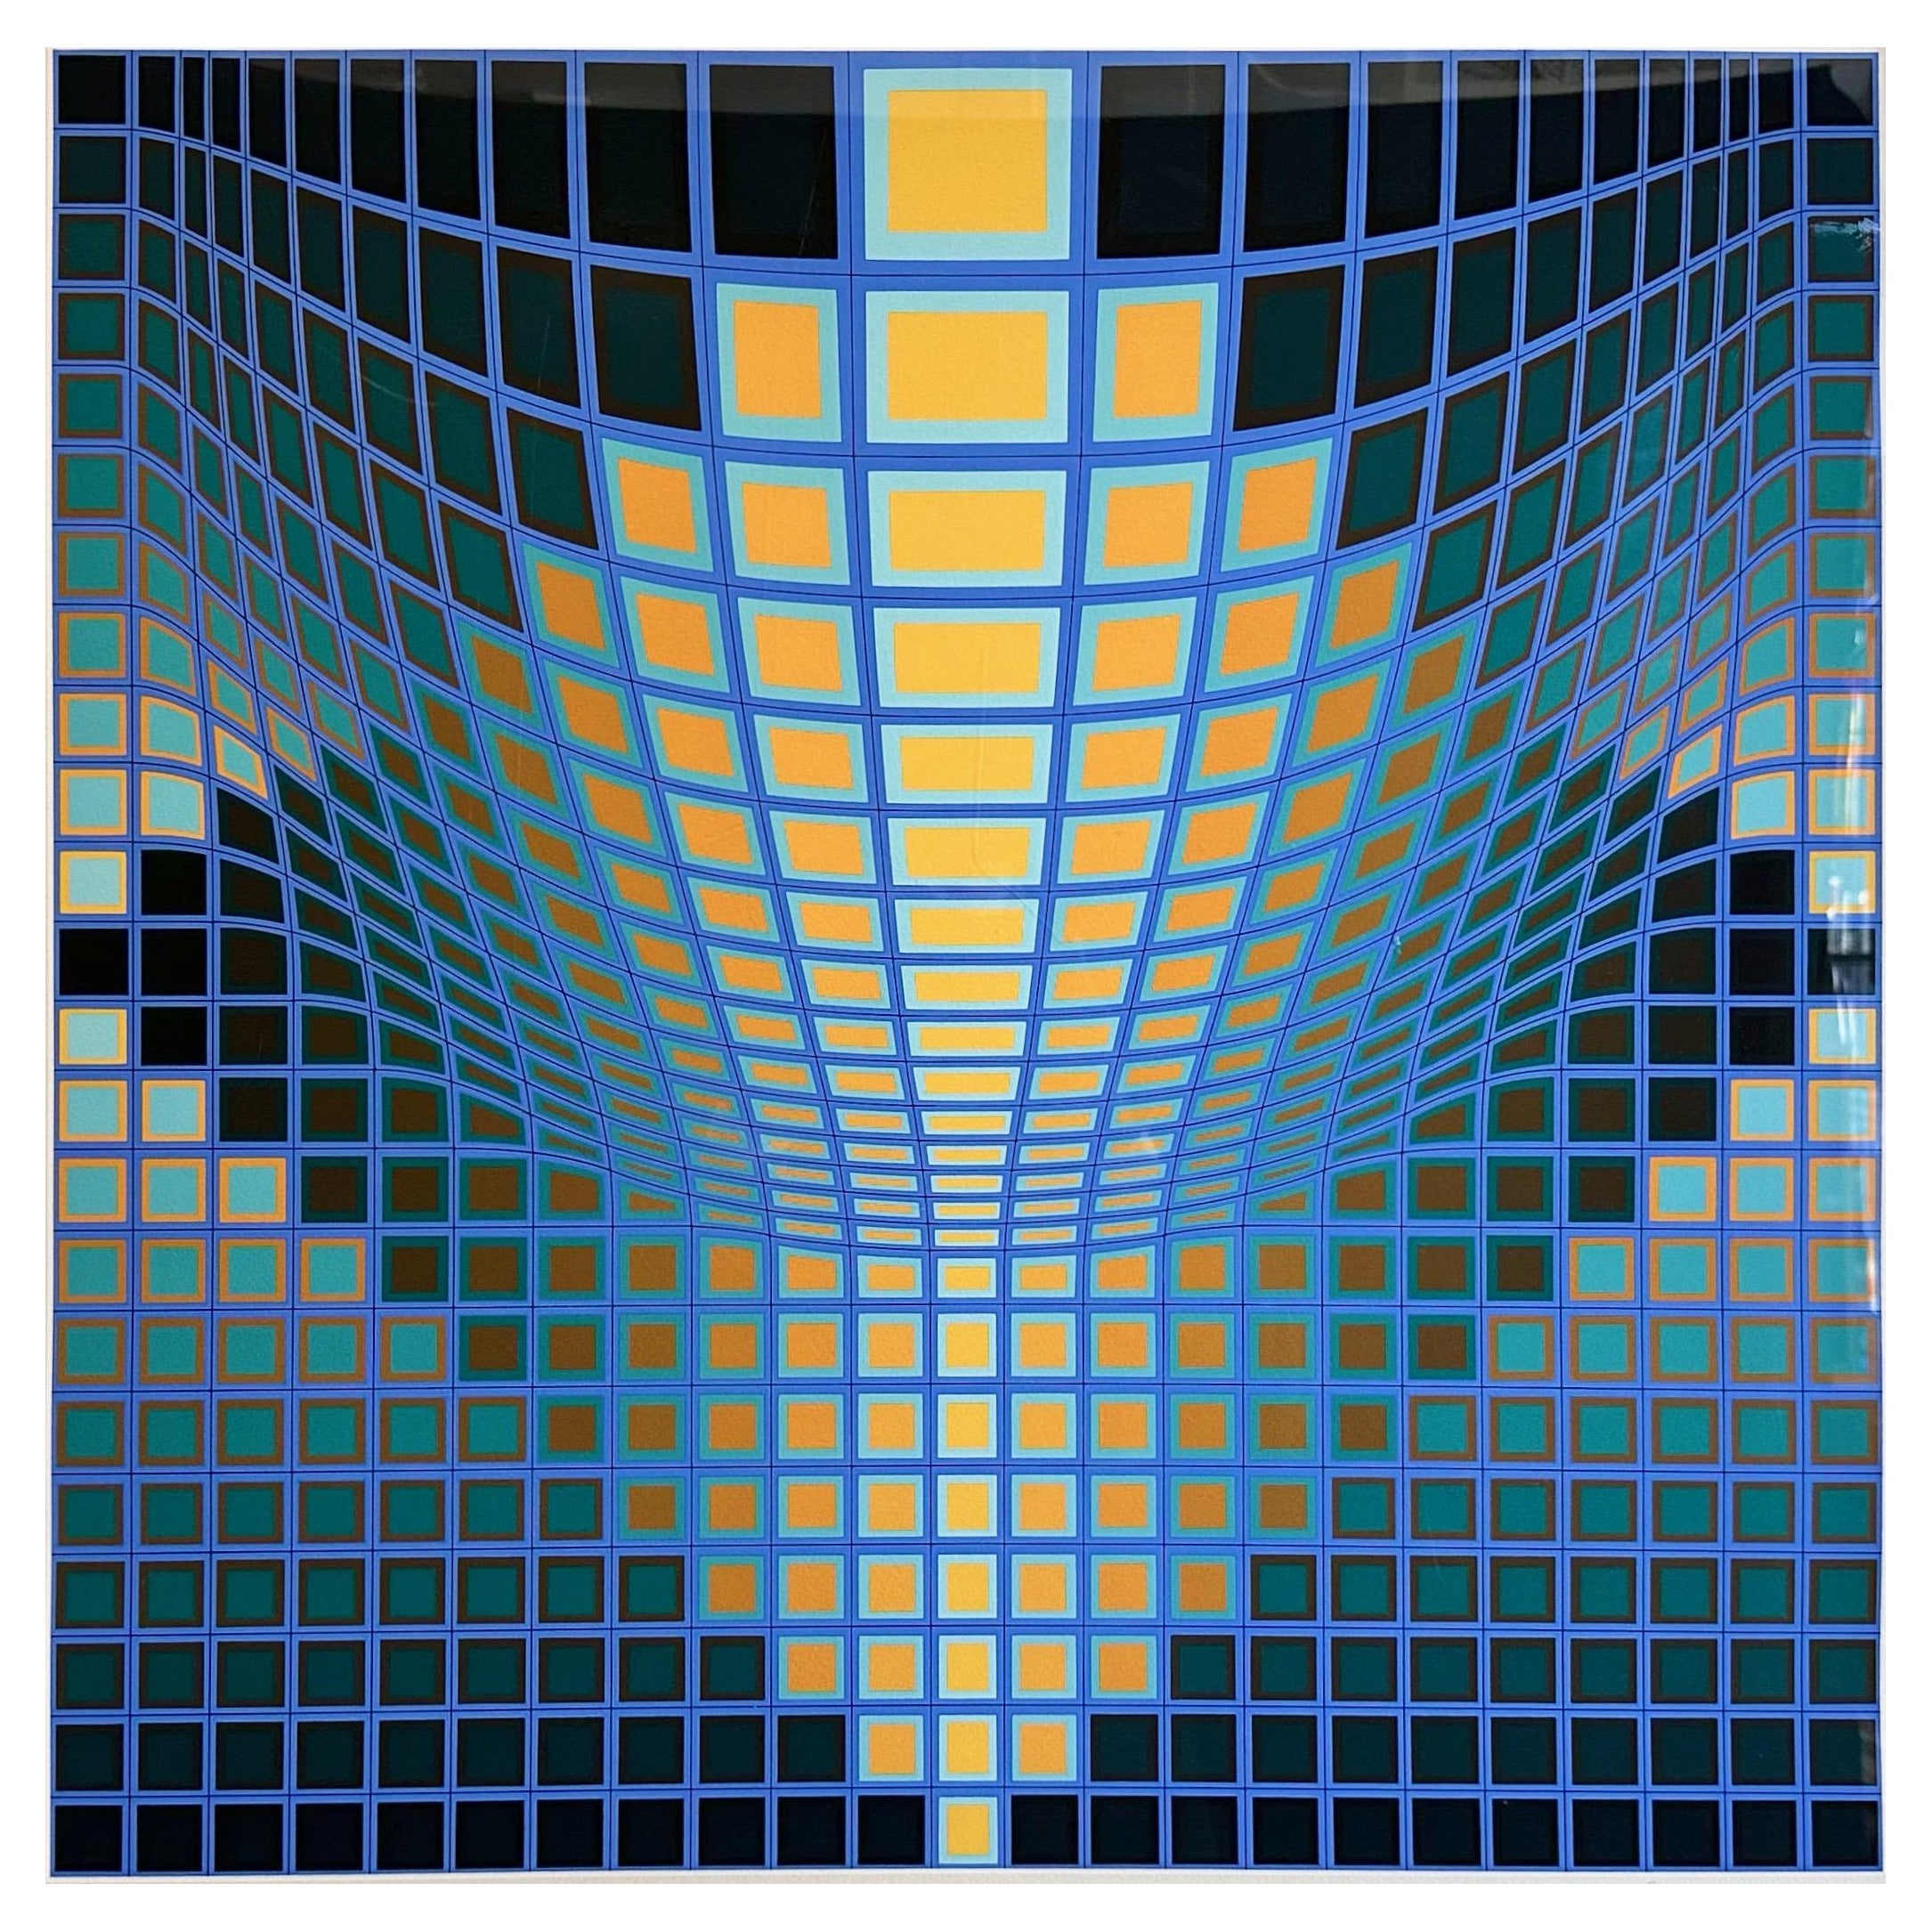 Victor Vasarely, “Untitled III”, Op Art Serigraph, Signed and Numbered, 1970